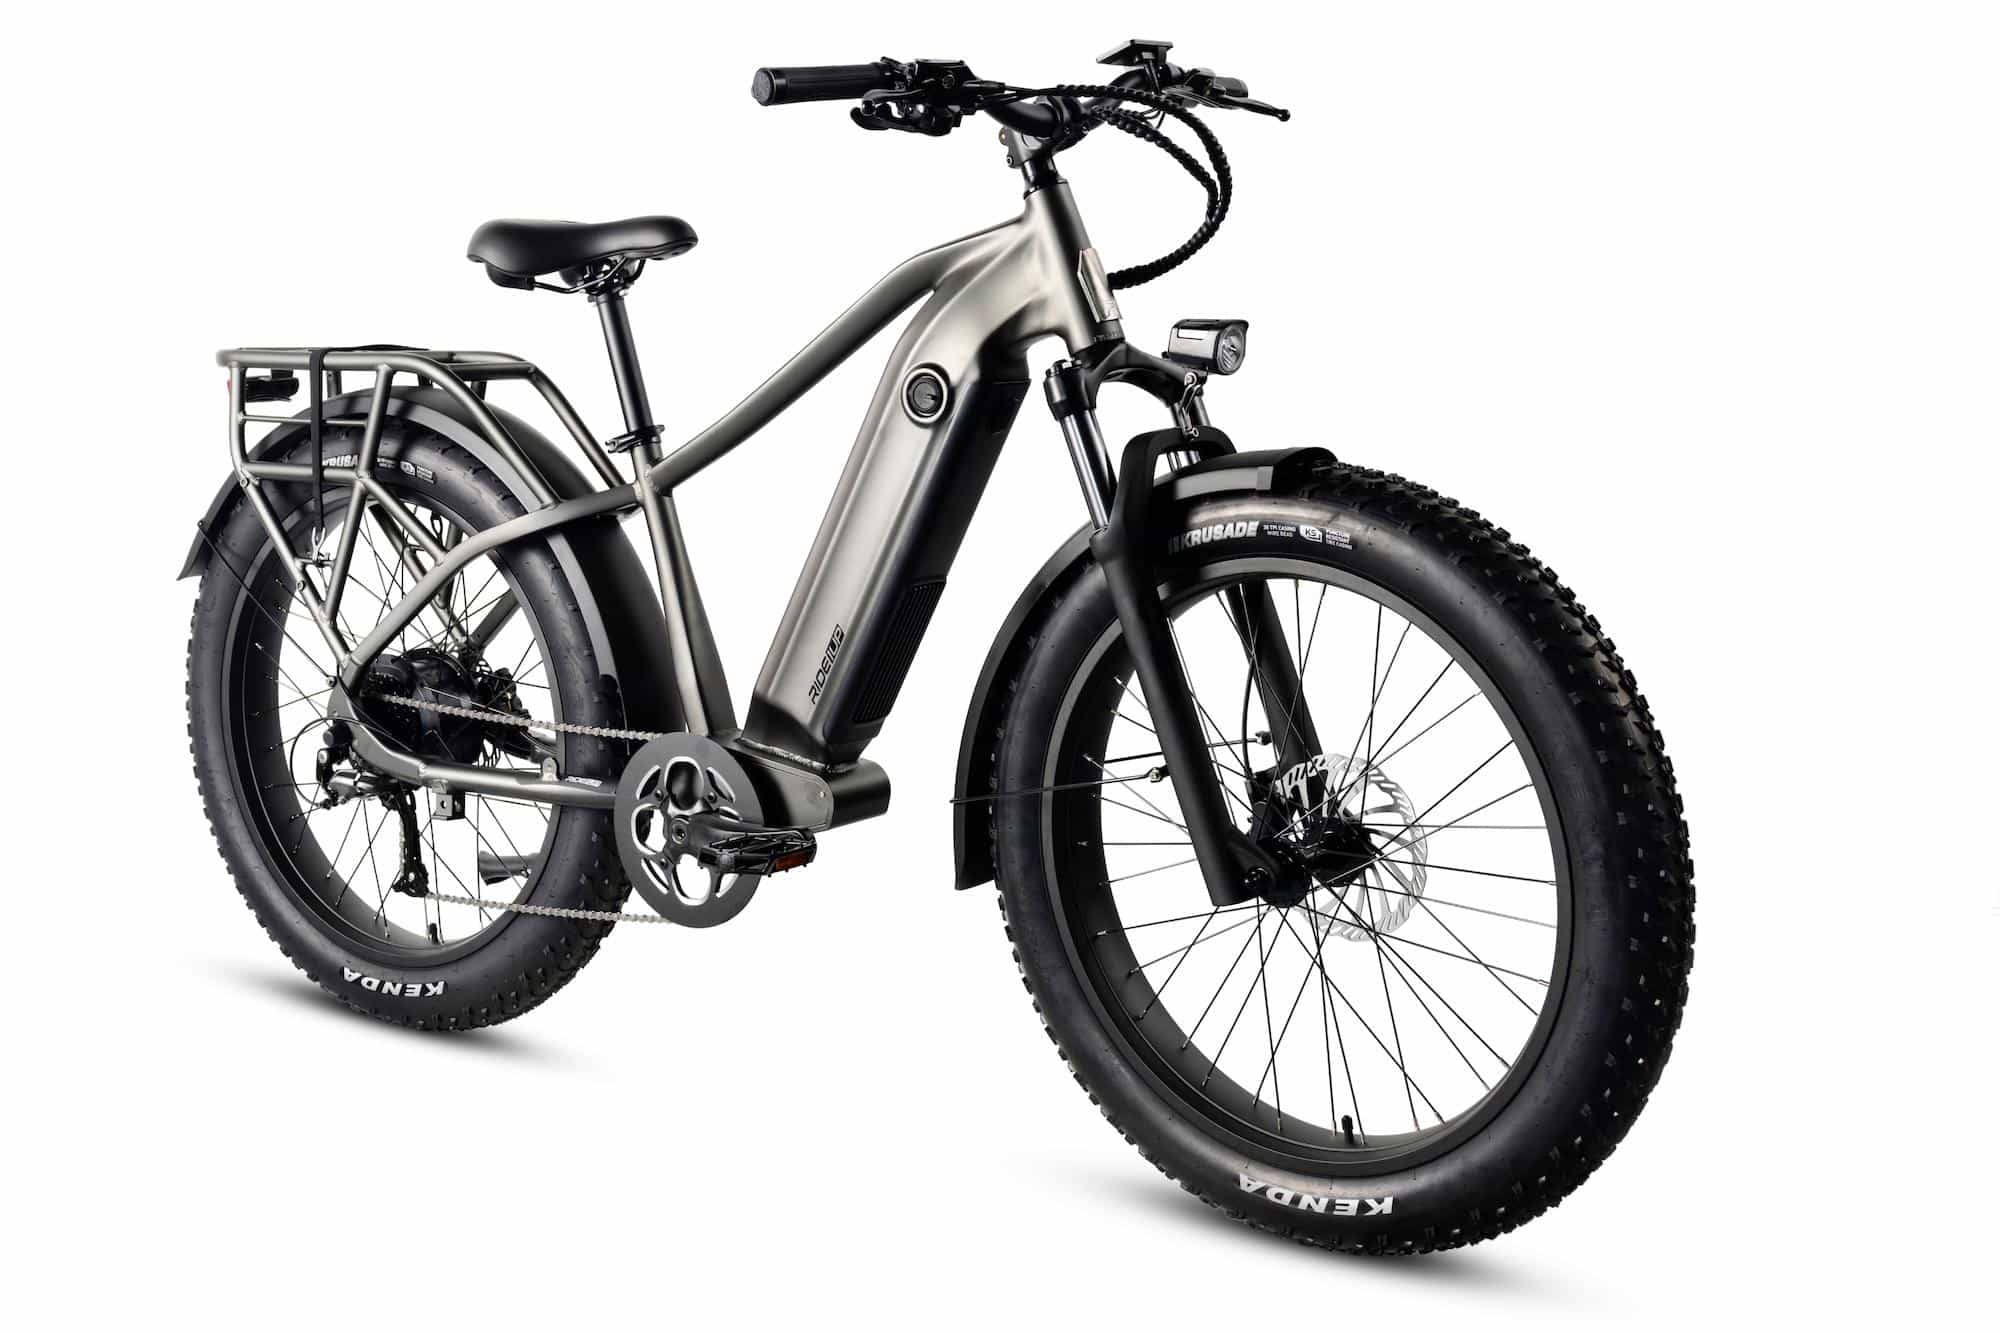 Motor Power: 750W Sustained<br>Speed: 28mph/20mph<br>Range: 45-60 miles per charge<br>Battery: 48V, 20ah <br>Payload Capacity: 150 lb capacity